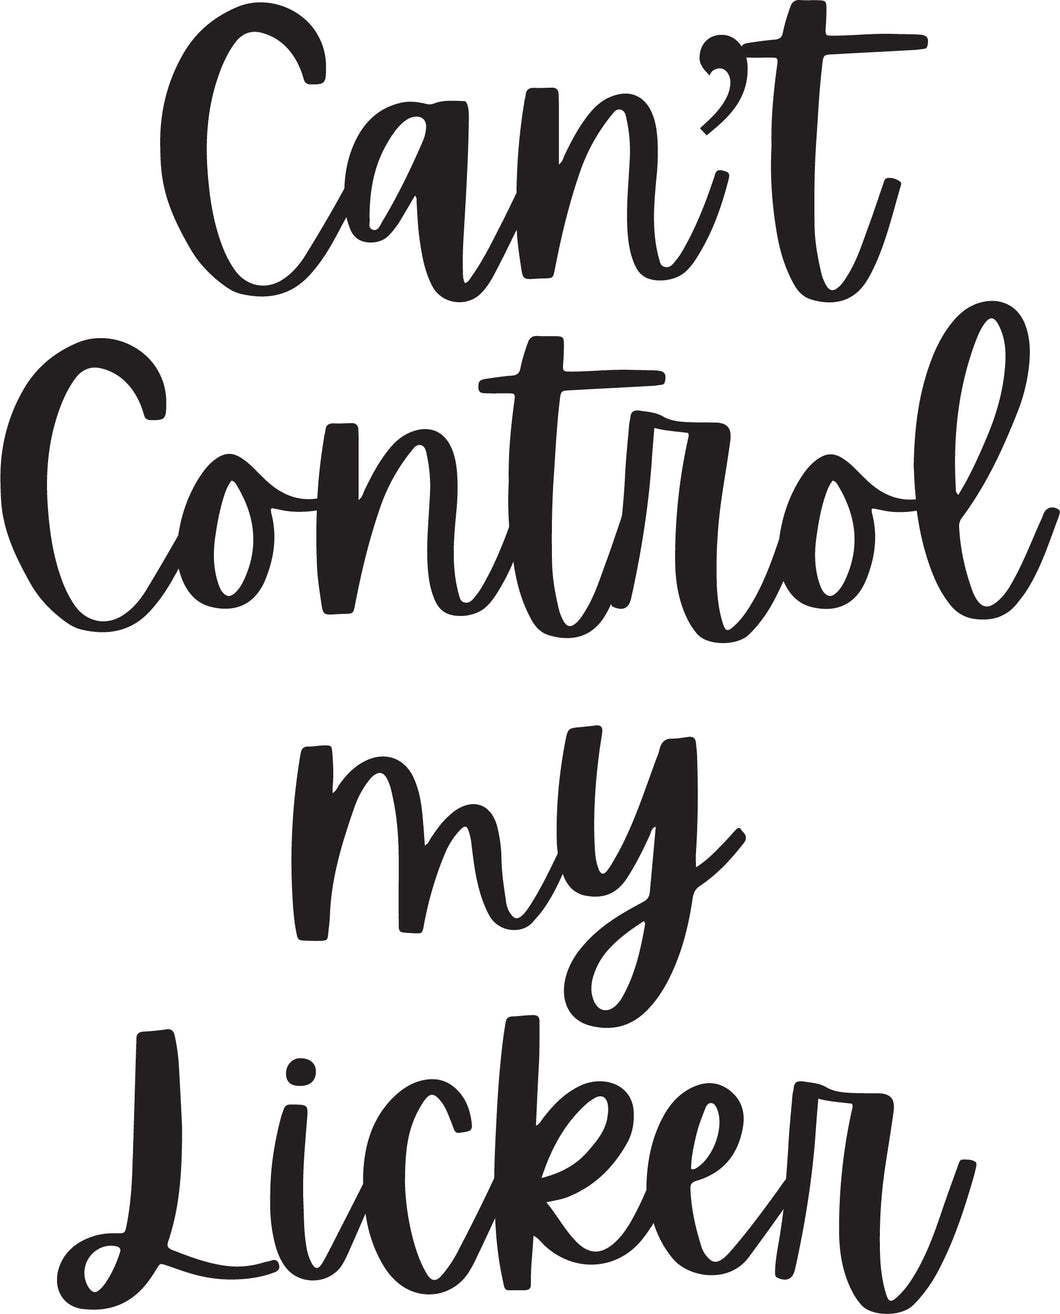 Can't Control My Licker